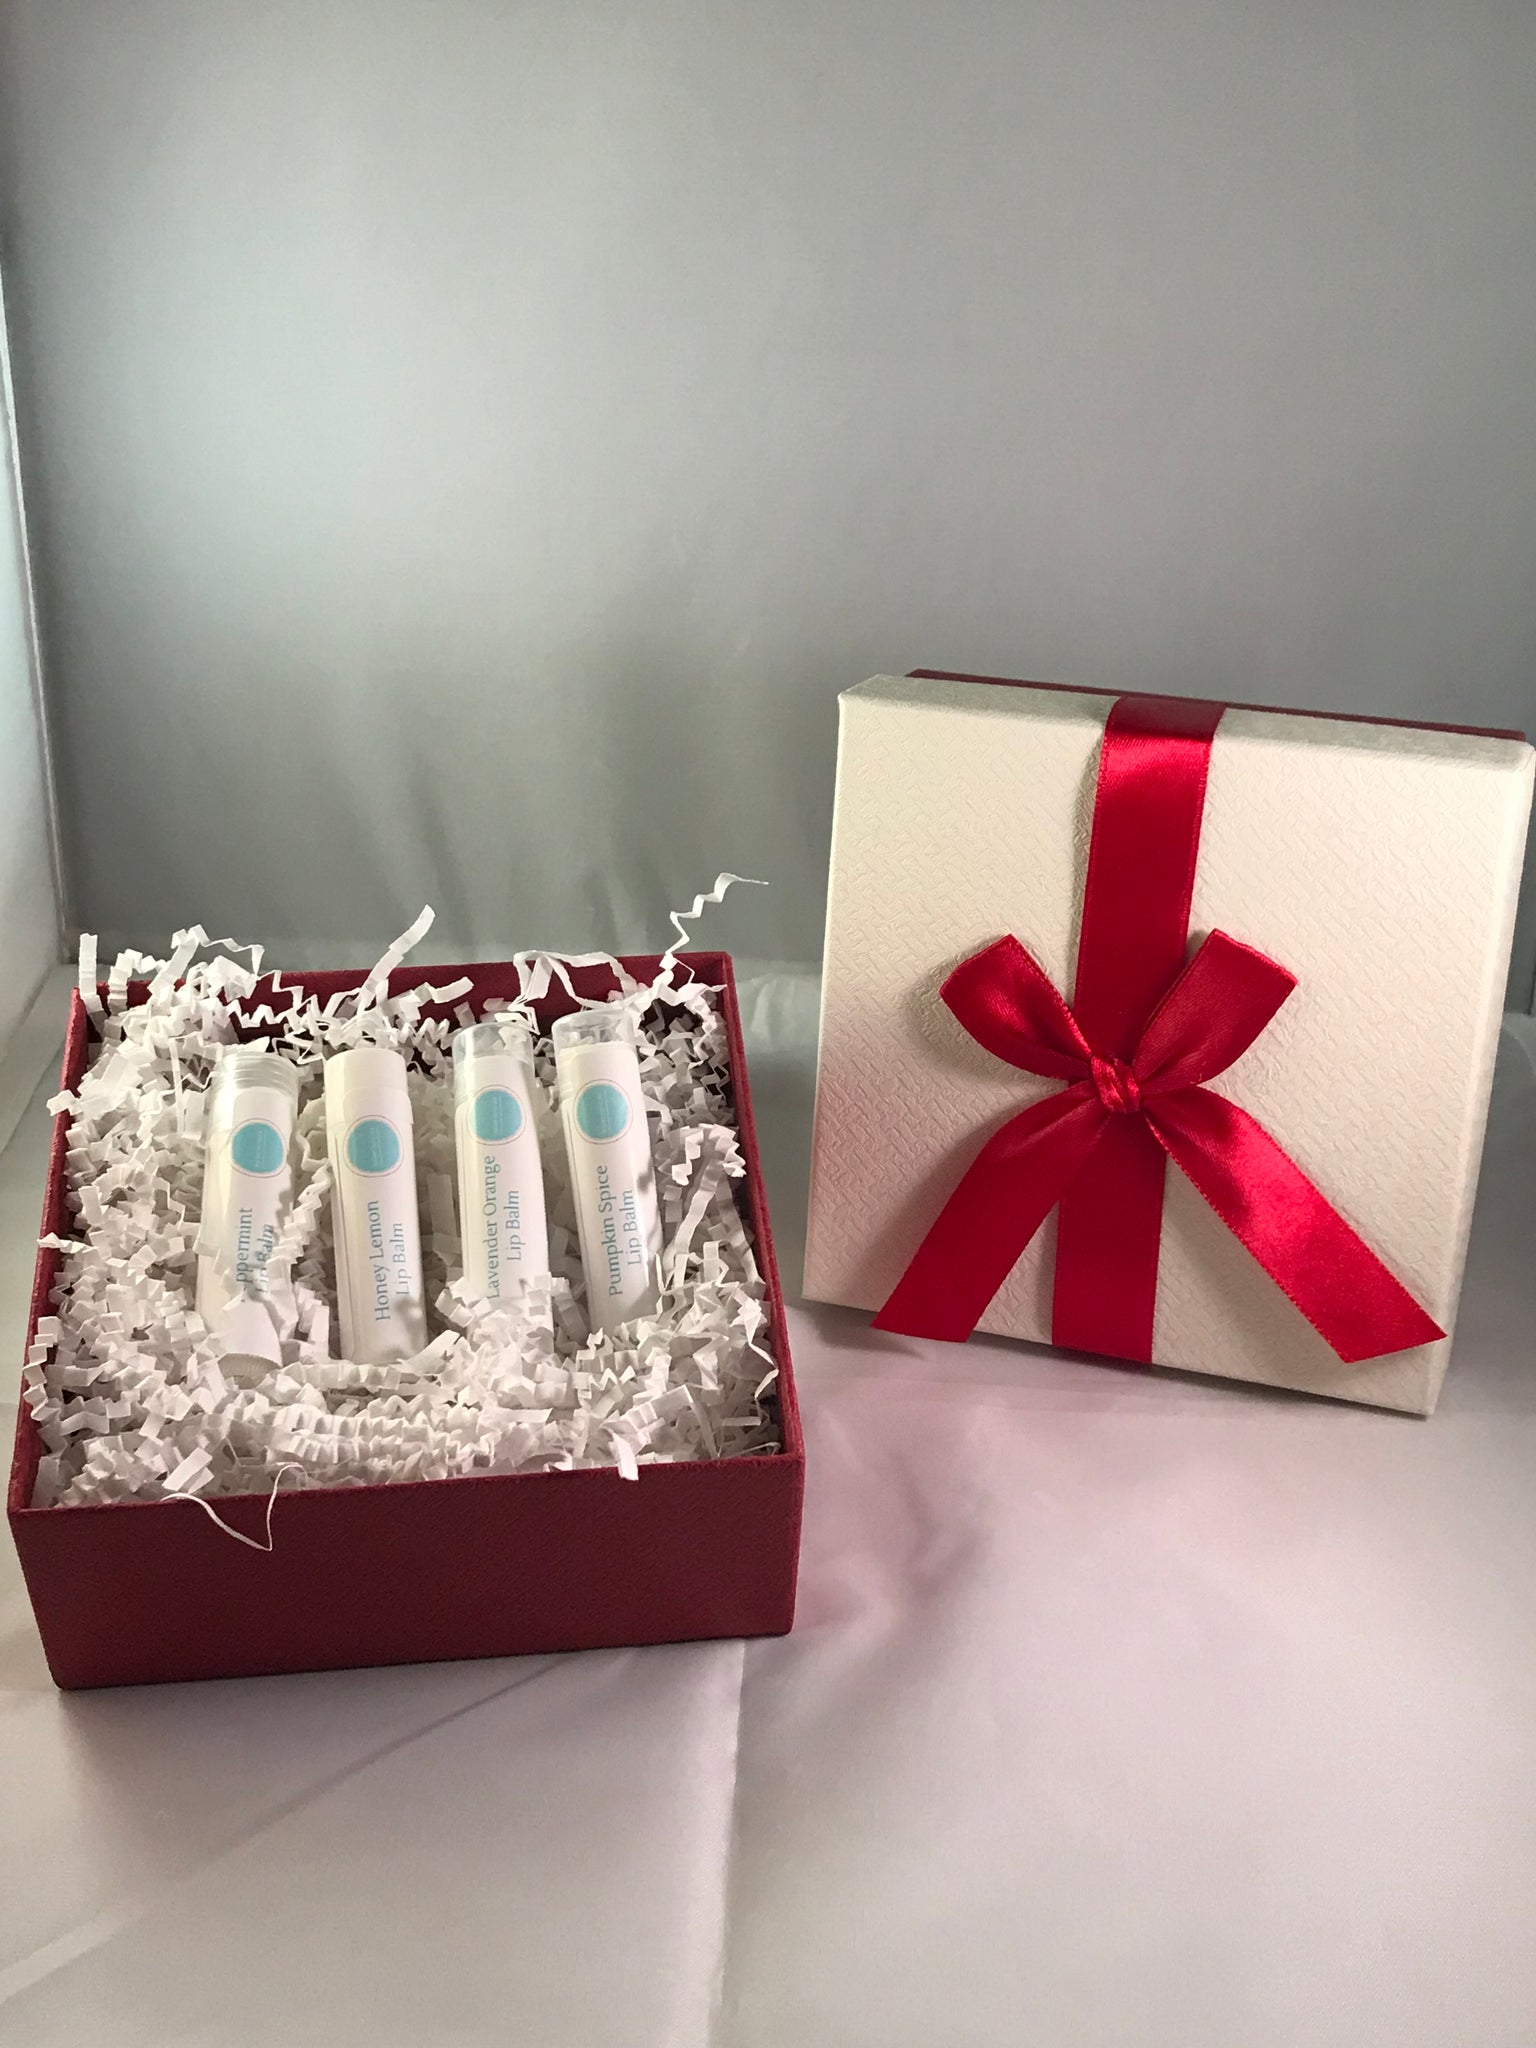 LeaBee Holiday Lip Balm Sampler - the PERFECT Stocking Stuffer